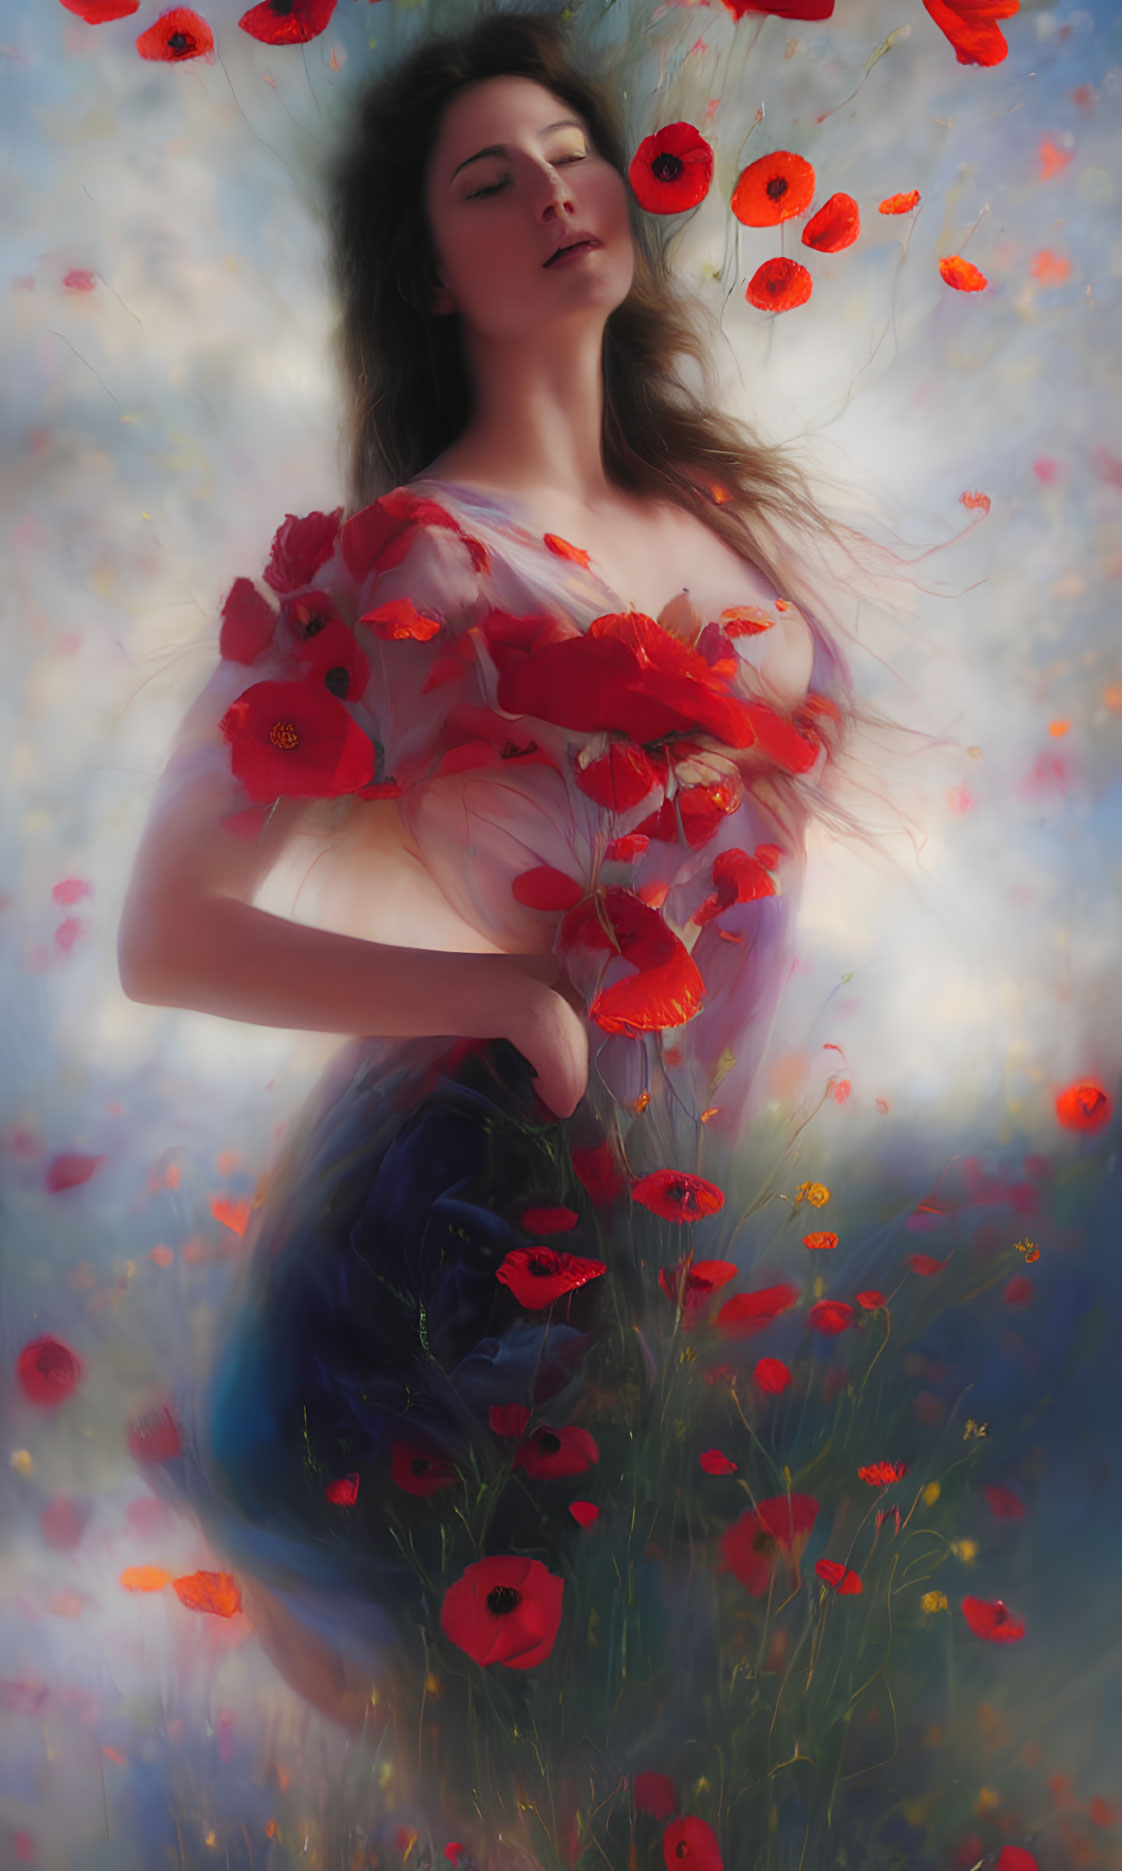 Serene woman portrait with floating red poppies in dreamy setting